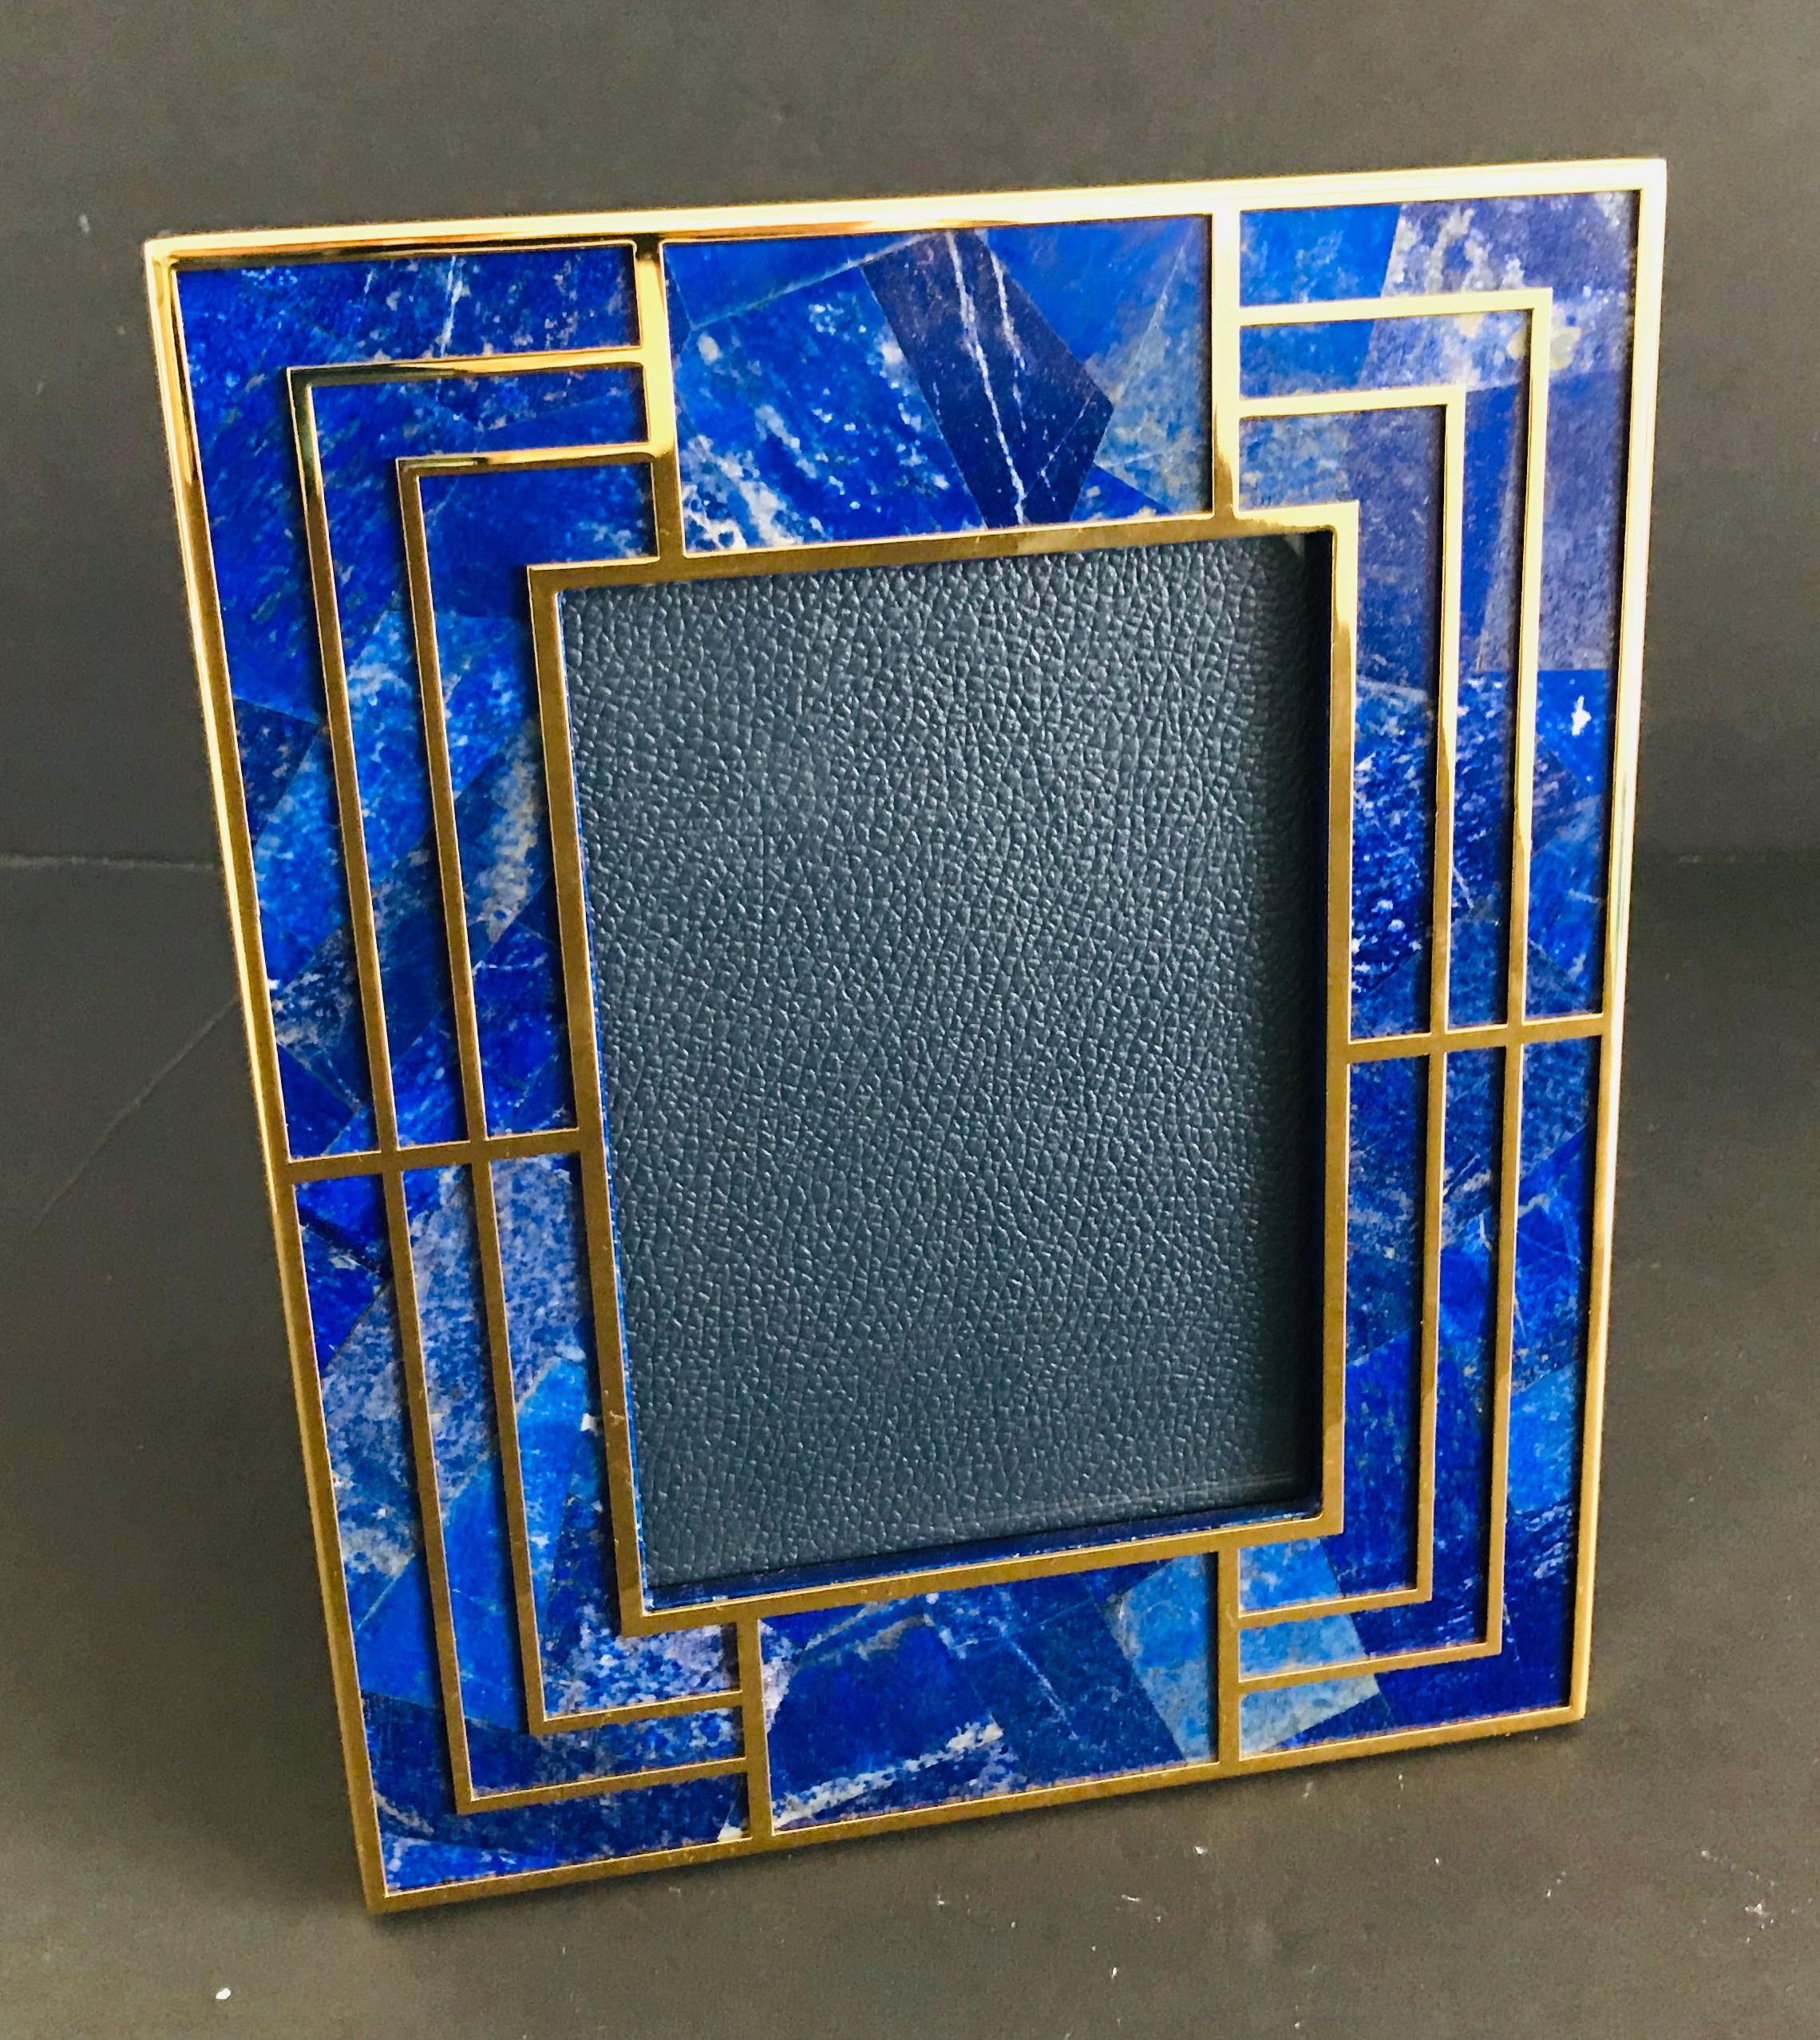 Lapis Lazuli and gold-plated picture frame by Fabio Ltd
Height: 10.5 inches / Width: 8.5 inches / Depth: 1 inch
Photo size: 5 inches by 7 inches
1 in stock in Palm Springs currently ON 20% OFF SALE for $1,999 !!! 
Order Reference #: FABIOLTD PF39